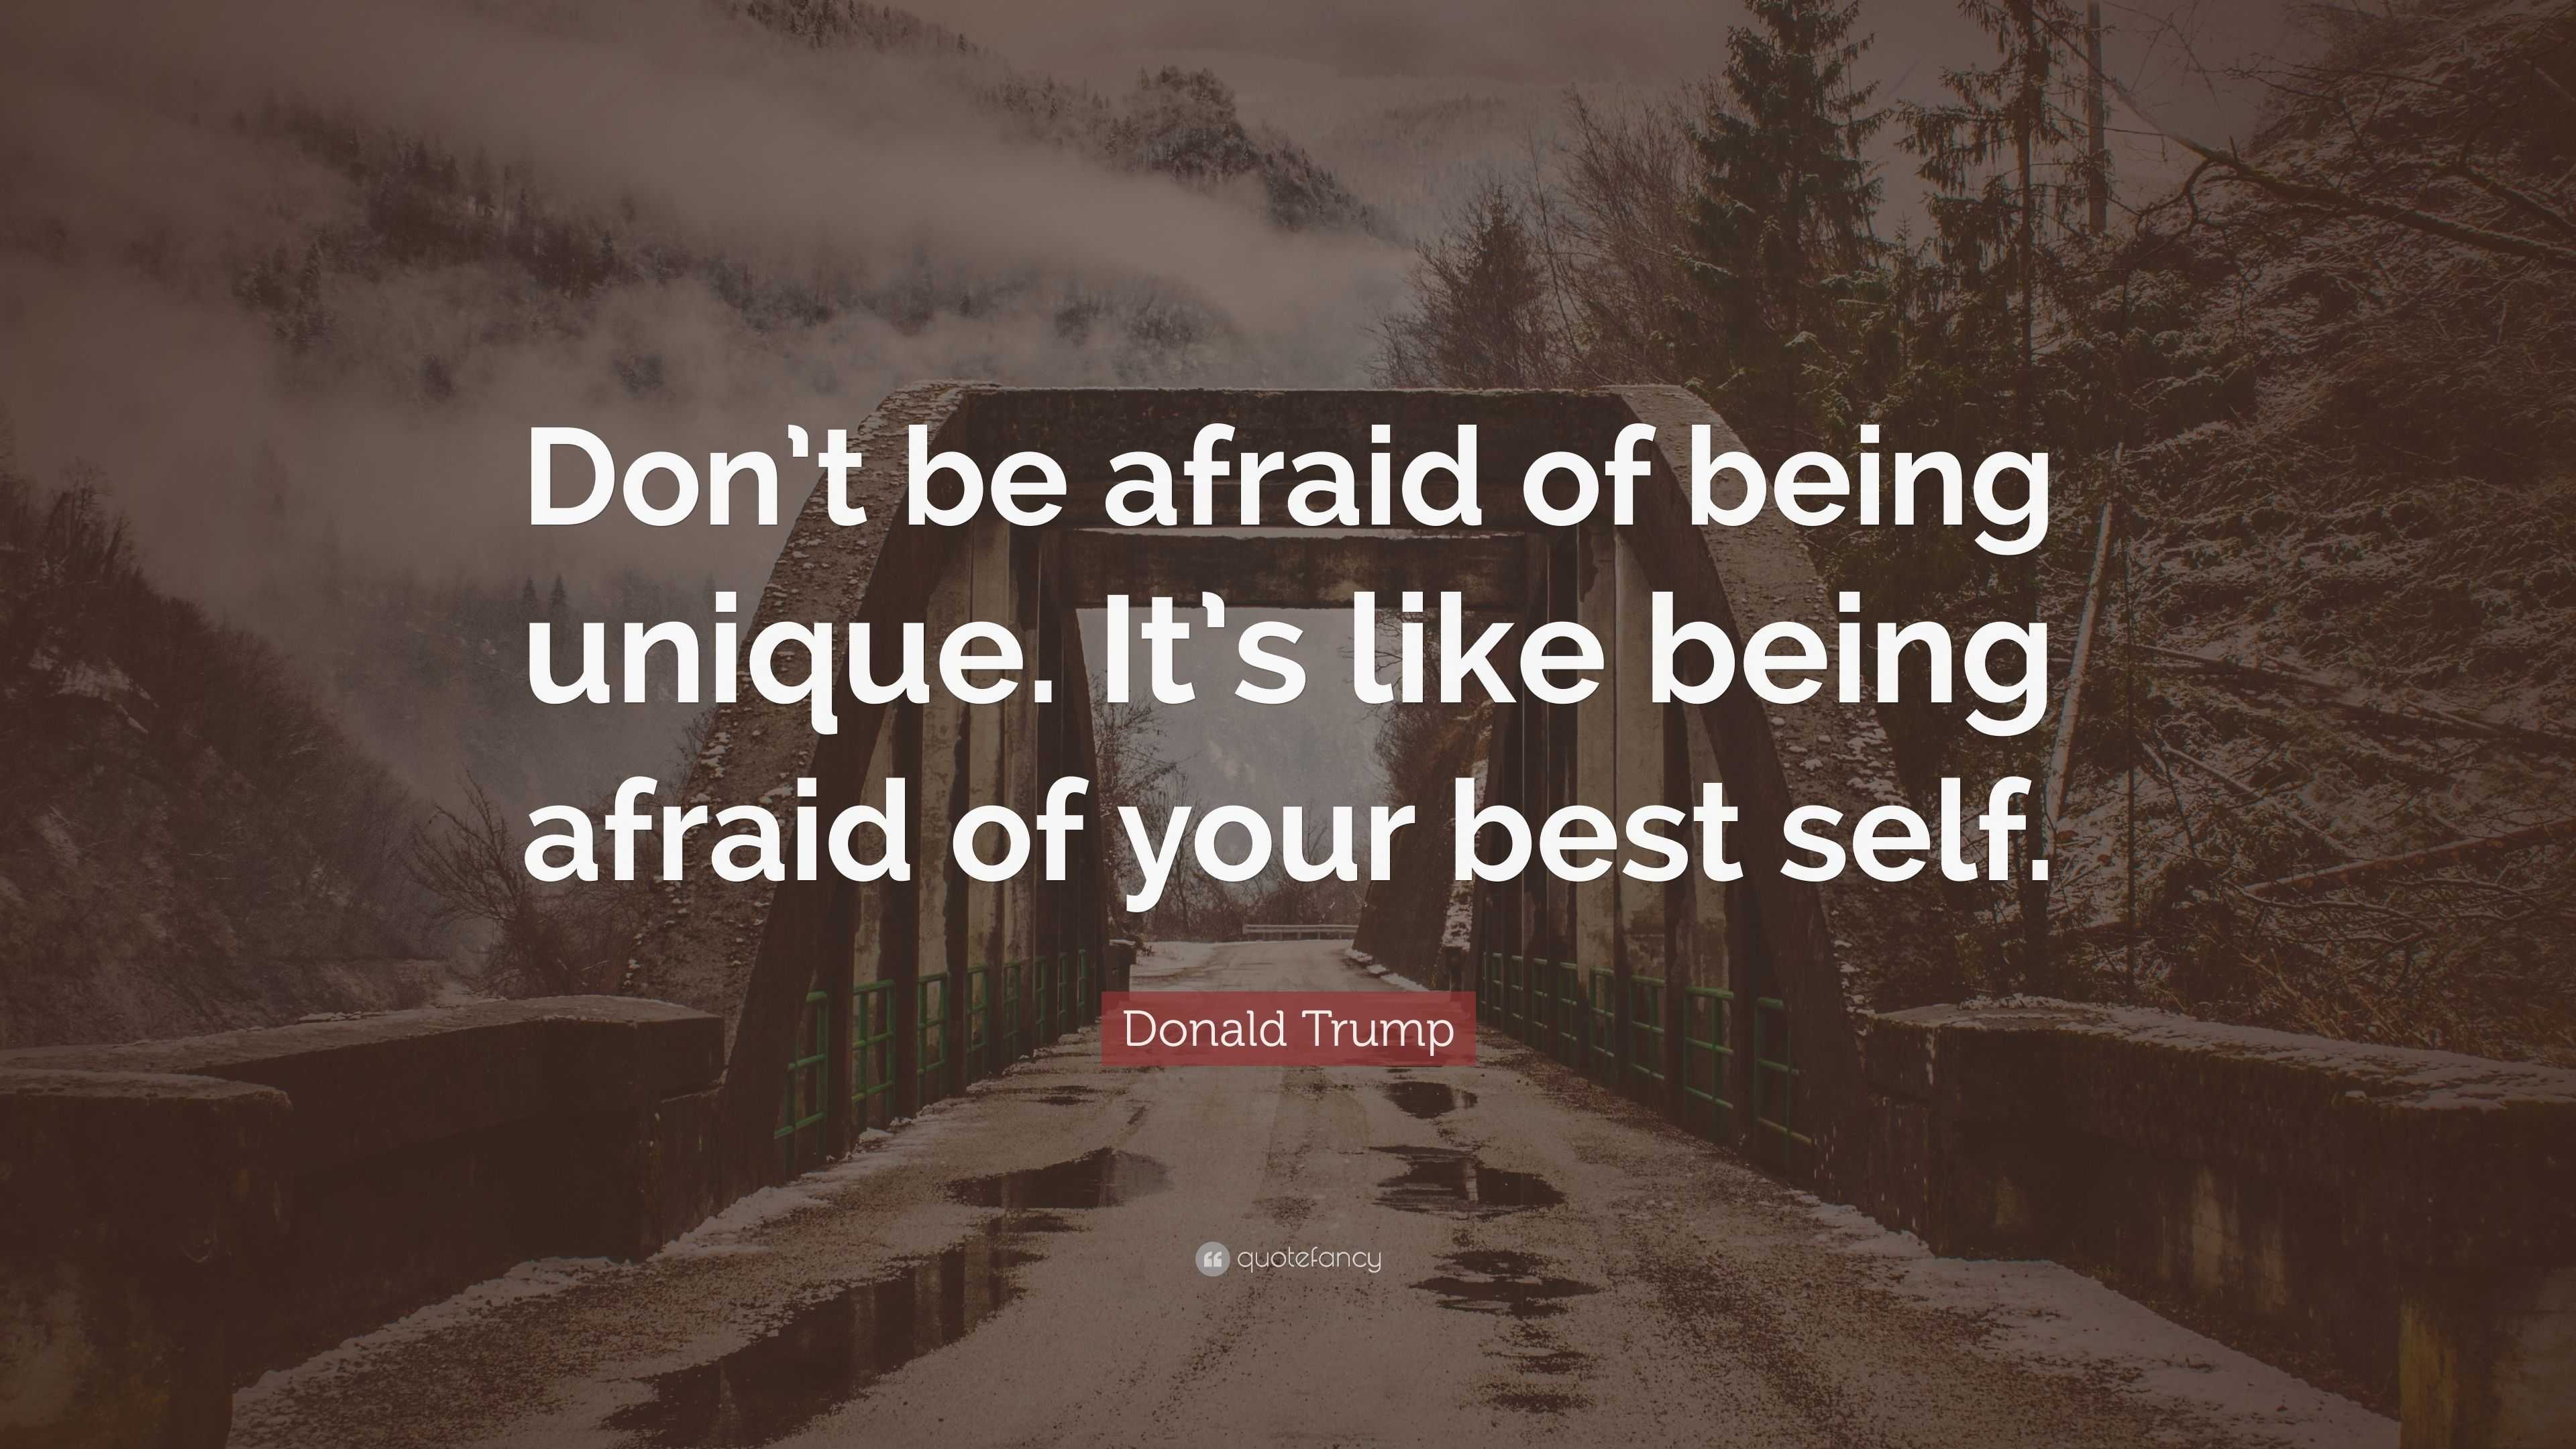 Donald Trump Quote: “Don’t be afraid of being unique. It’s like being